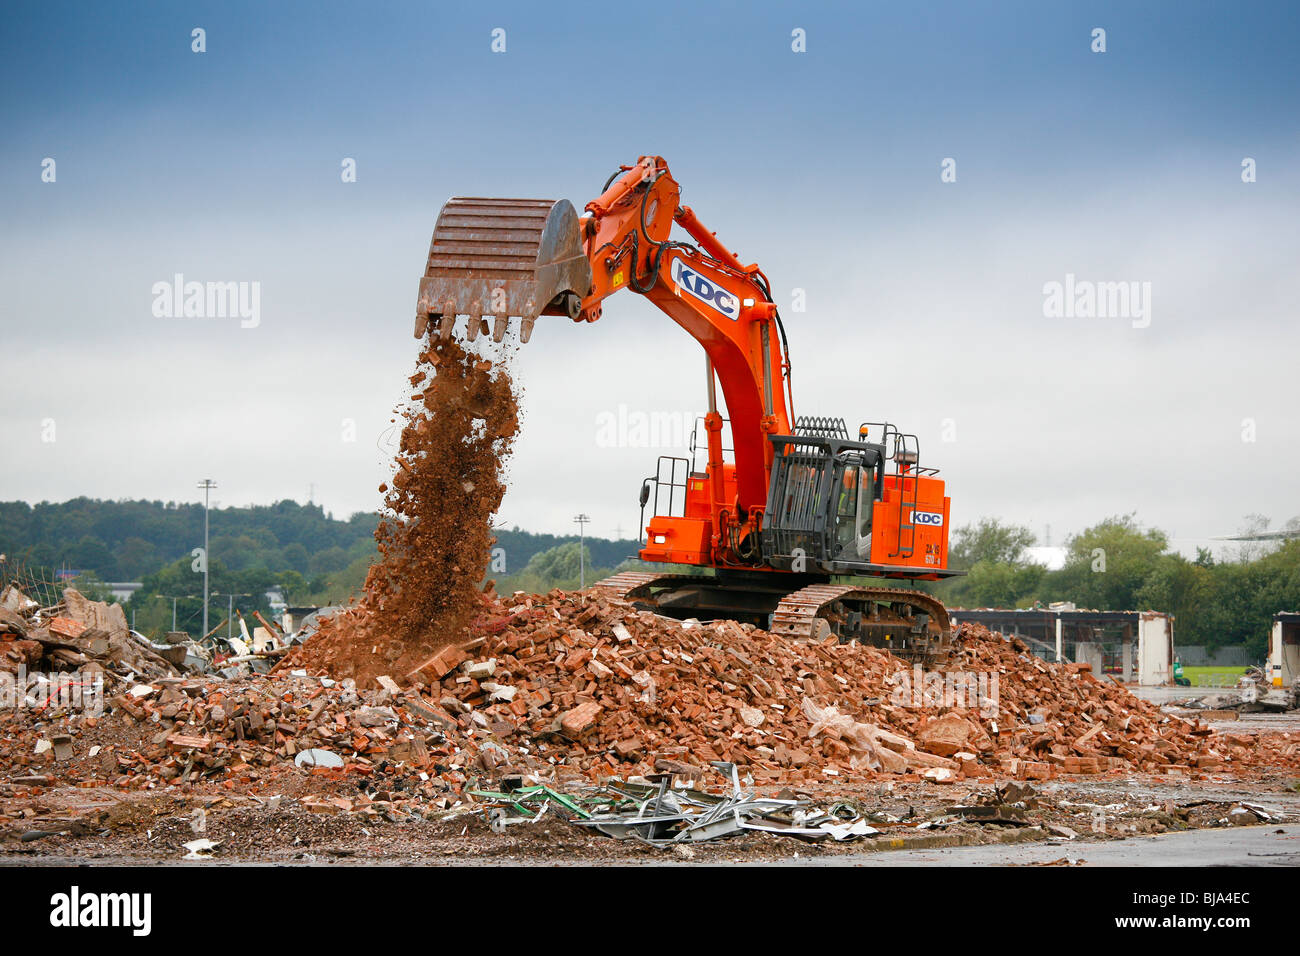 A digger working on the demolition of industrial an site. Stock Photo